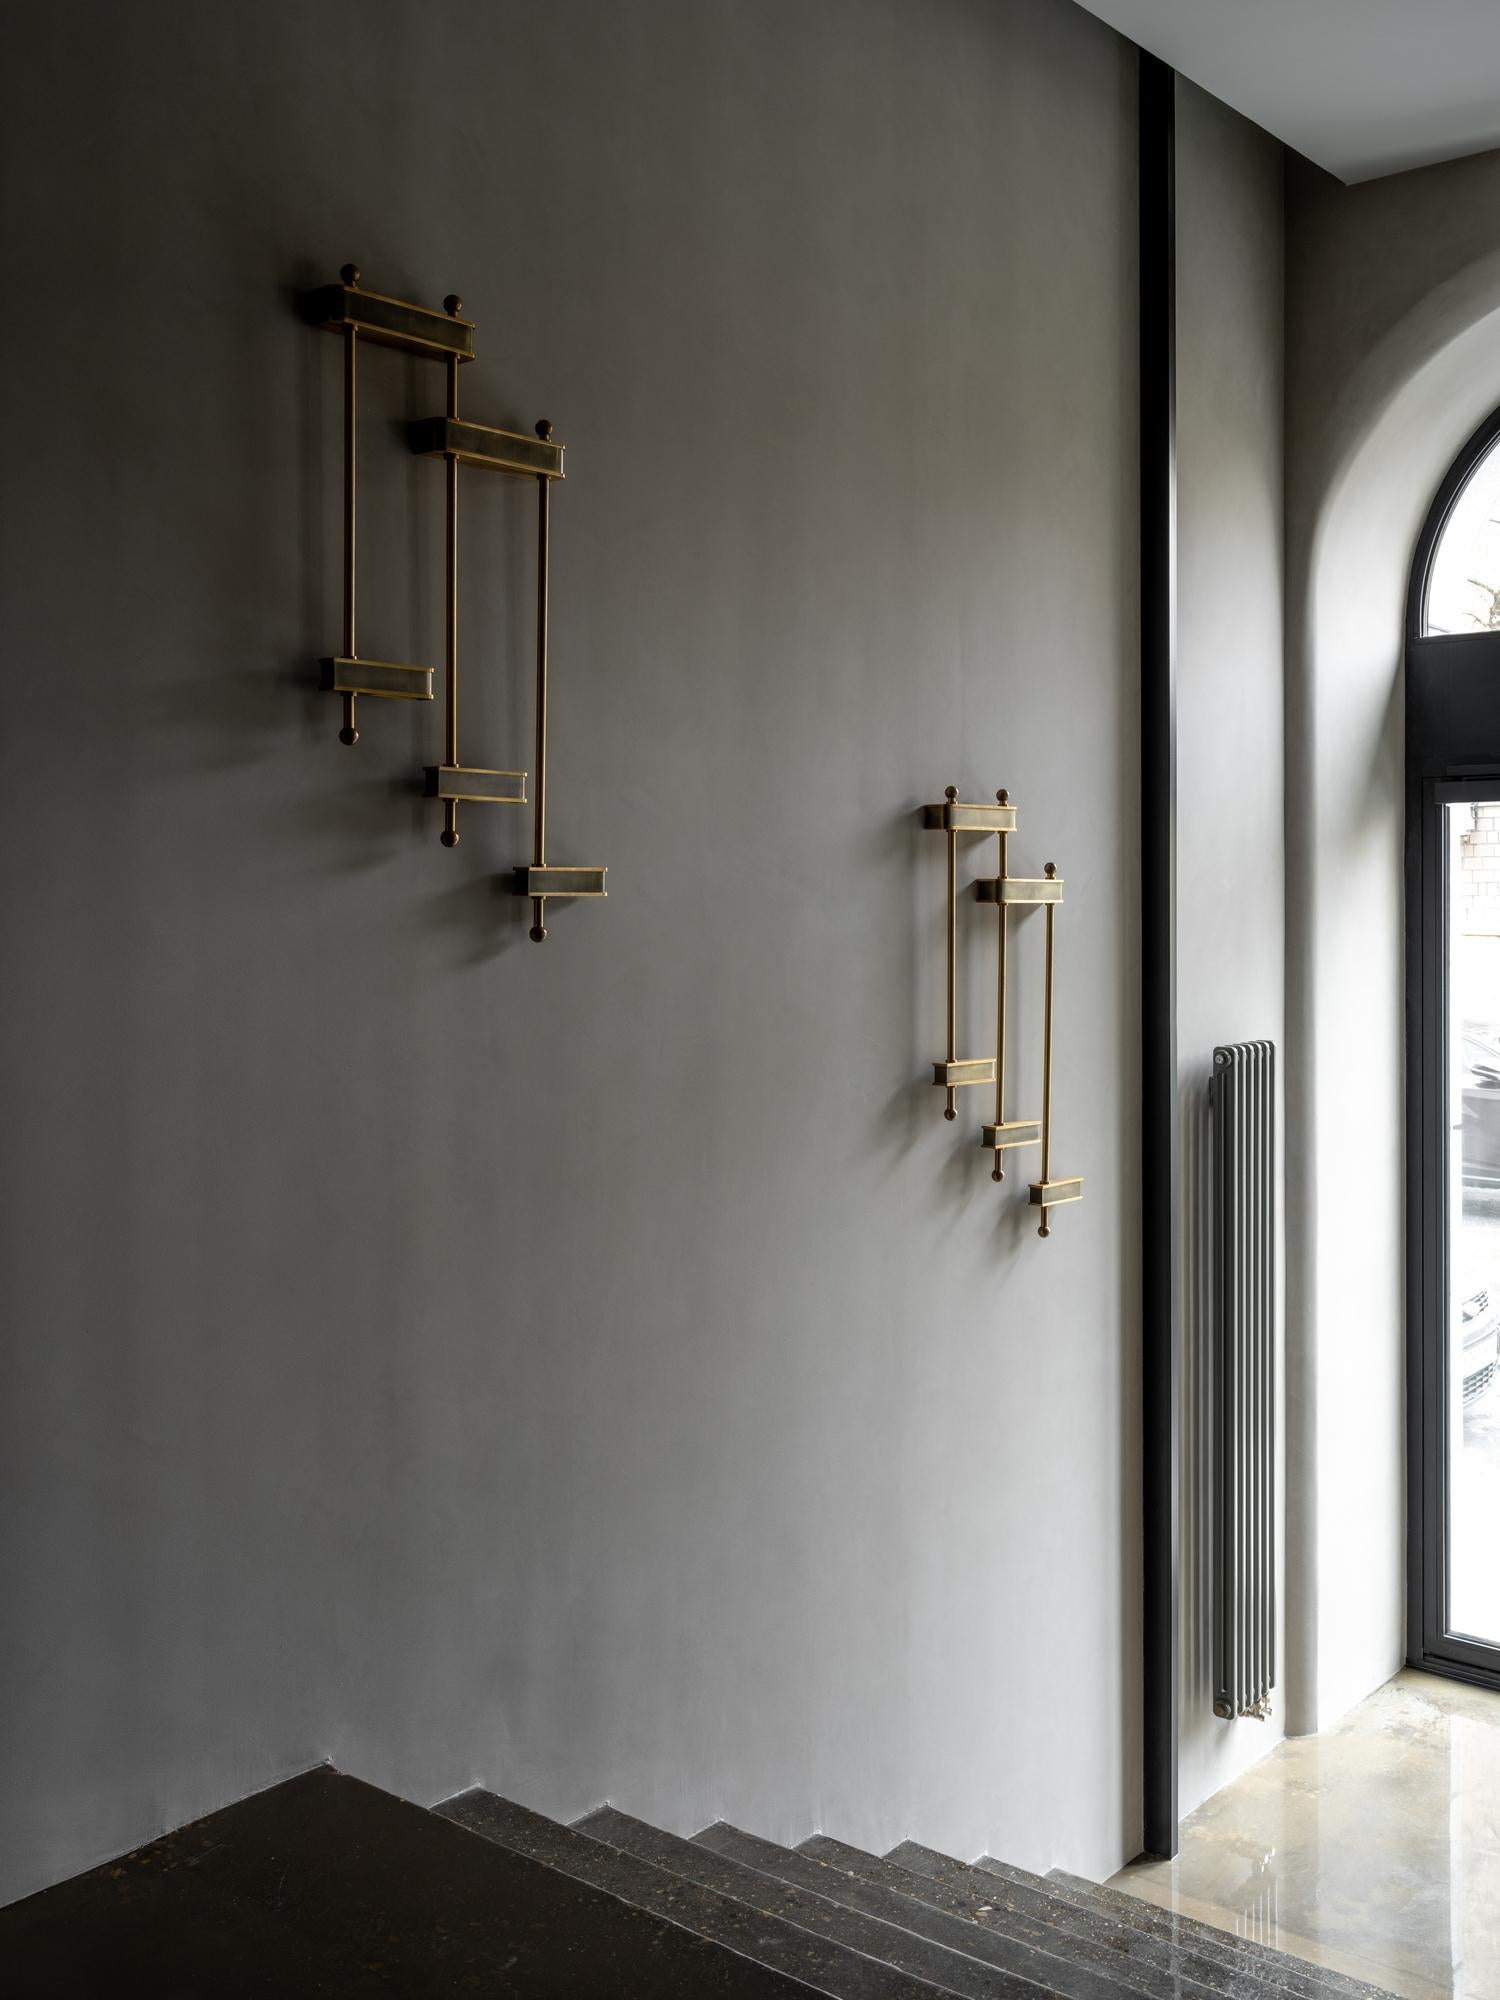 Introducing O&A London's Fornacis Wall Light – the perfect addition to any stairway! This contemporary metal fixture has a unique stepped form that makes it an ideal choice for illuminating staircases, creating stylish yet functional lighting.